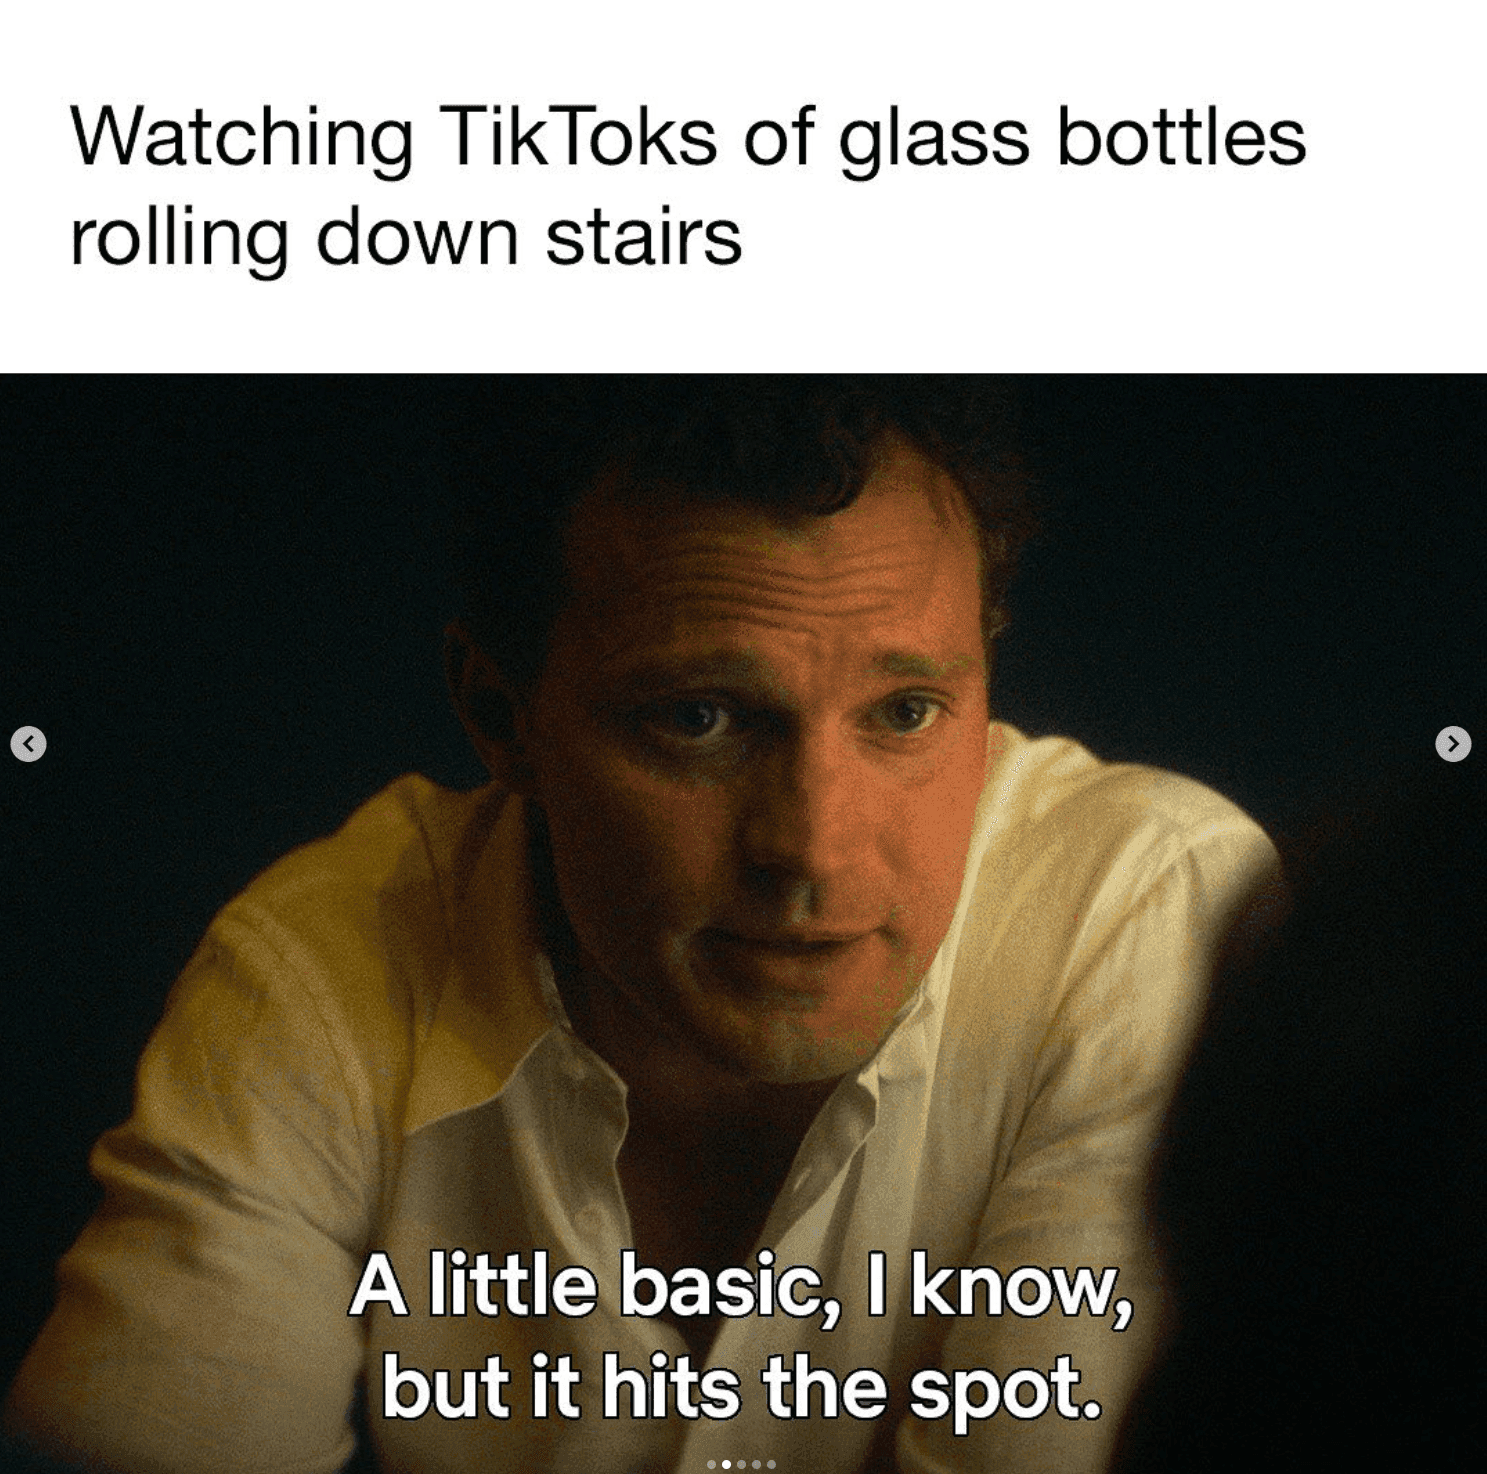 Netflix Instagram meme - caption "Watching TikToks of glass bottles rolling down stairs" with picture of show with person saying "A little basic, I know, but it hits the spot."